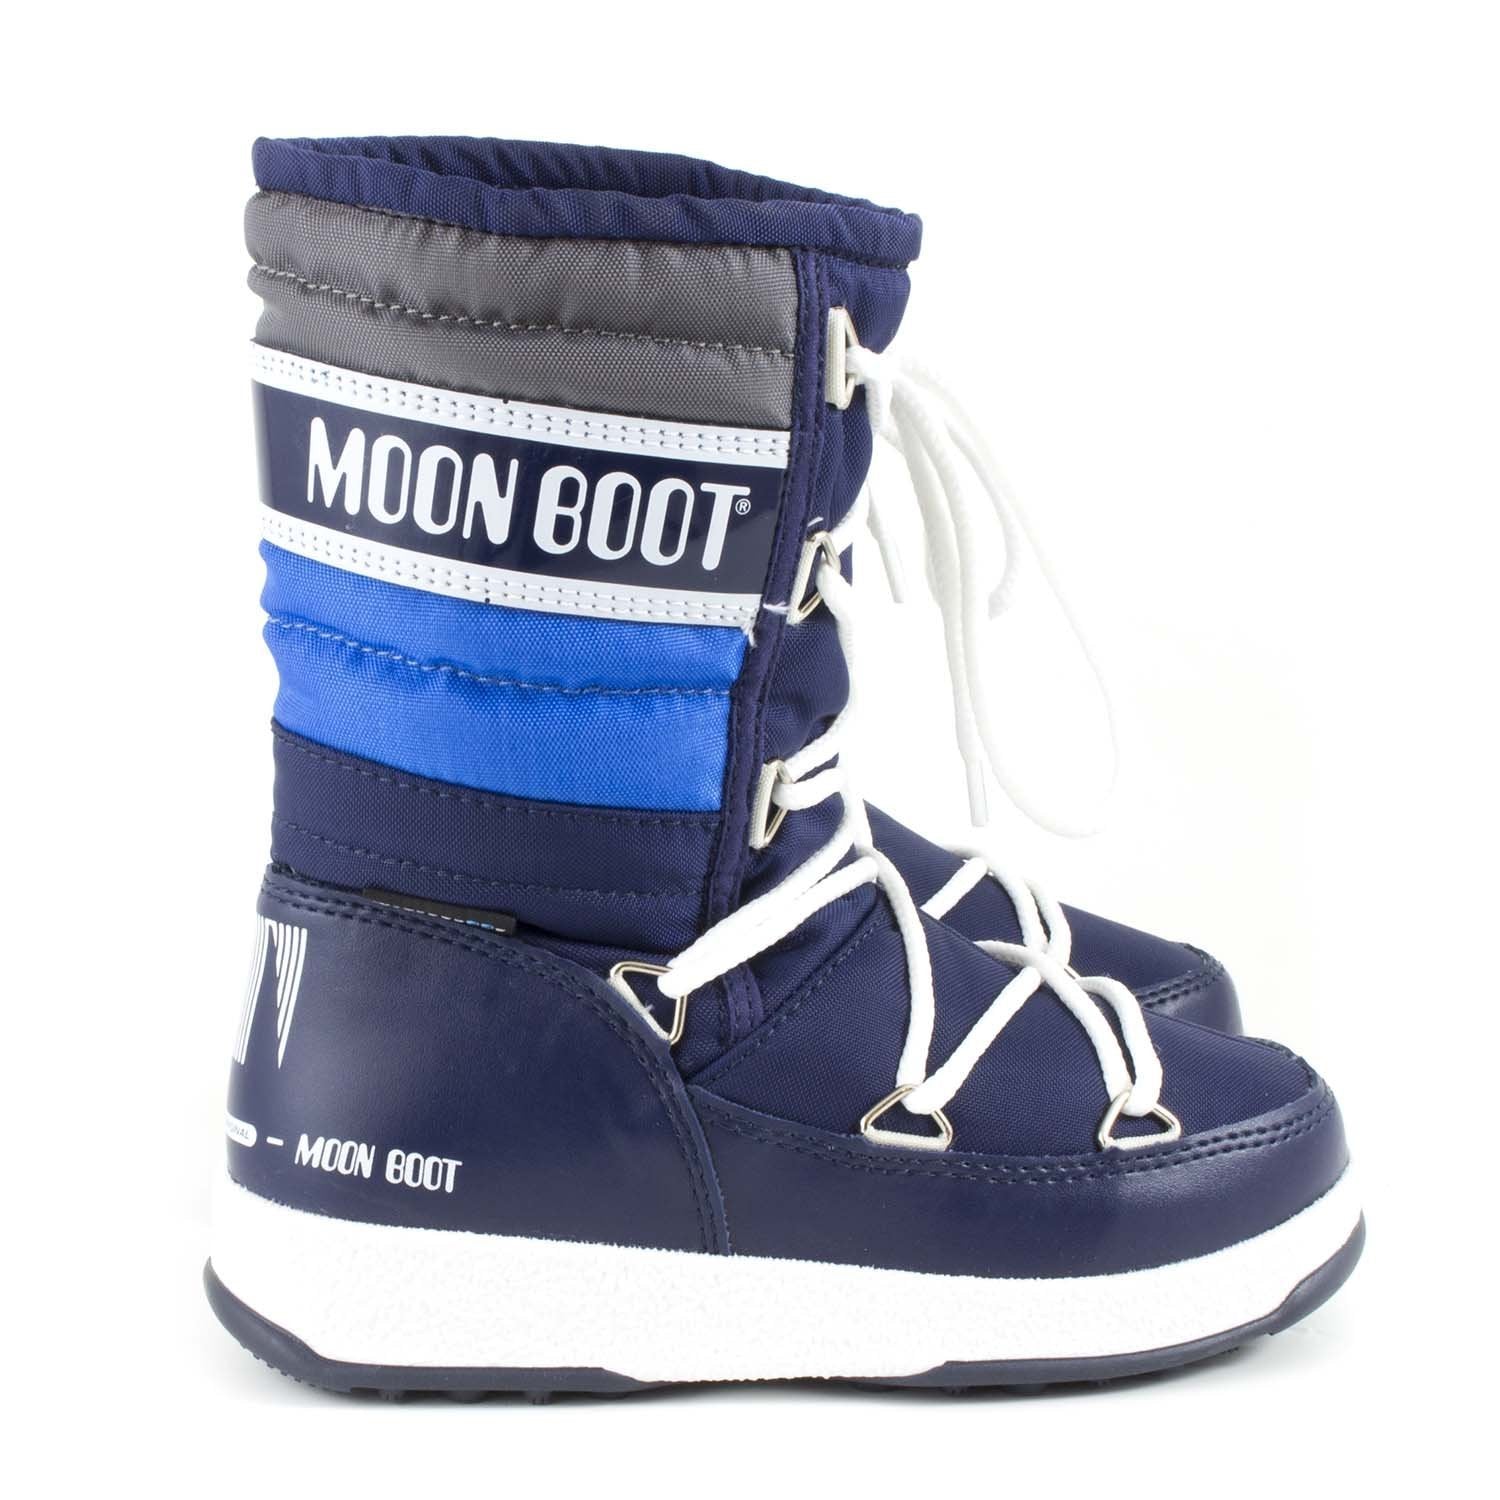 Moon Boot Quilted-Fille-MOON BOOT-Maralex Paris (1975811768383)